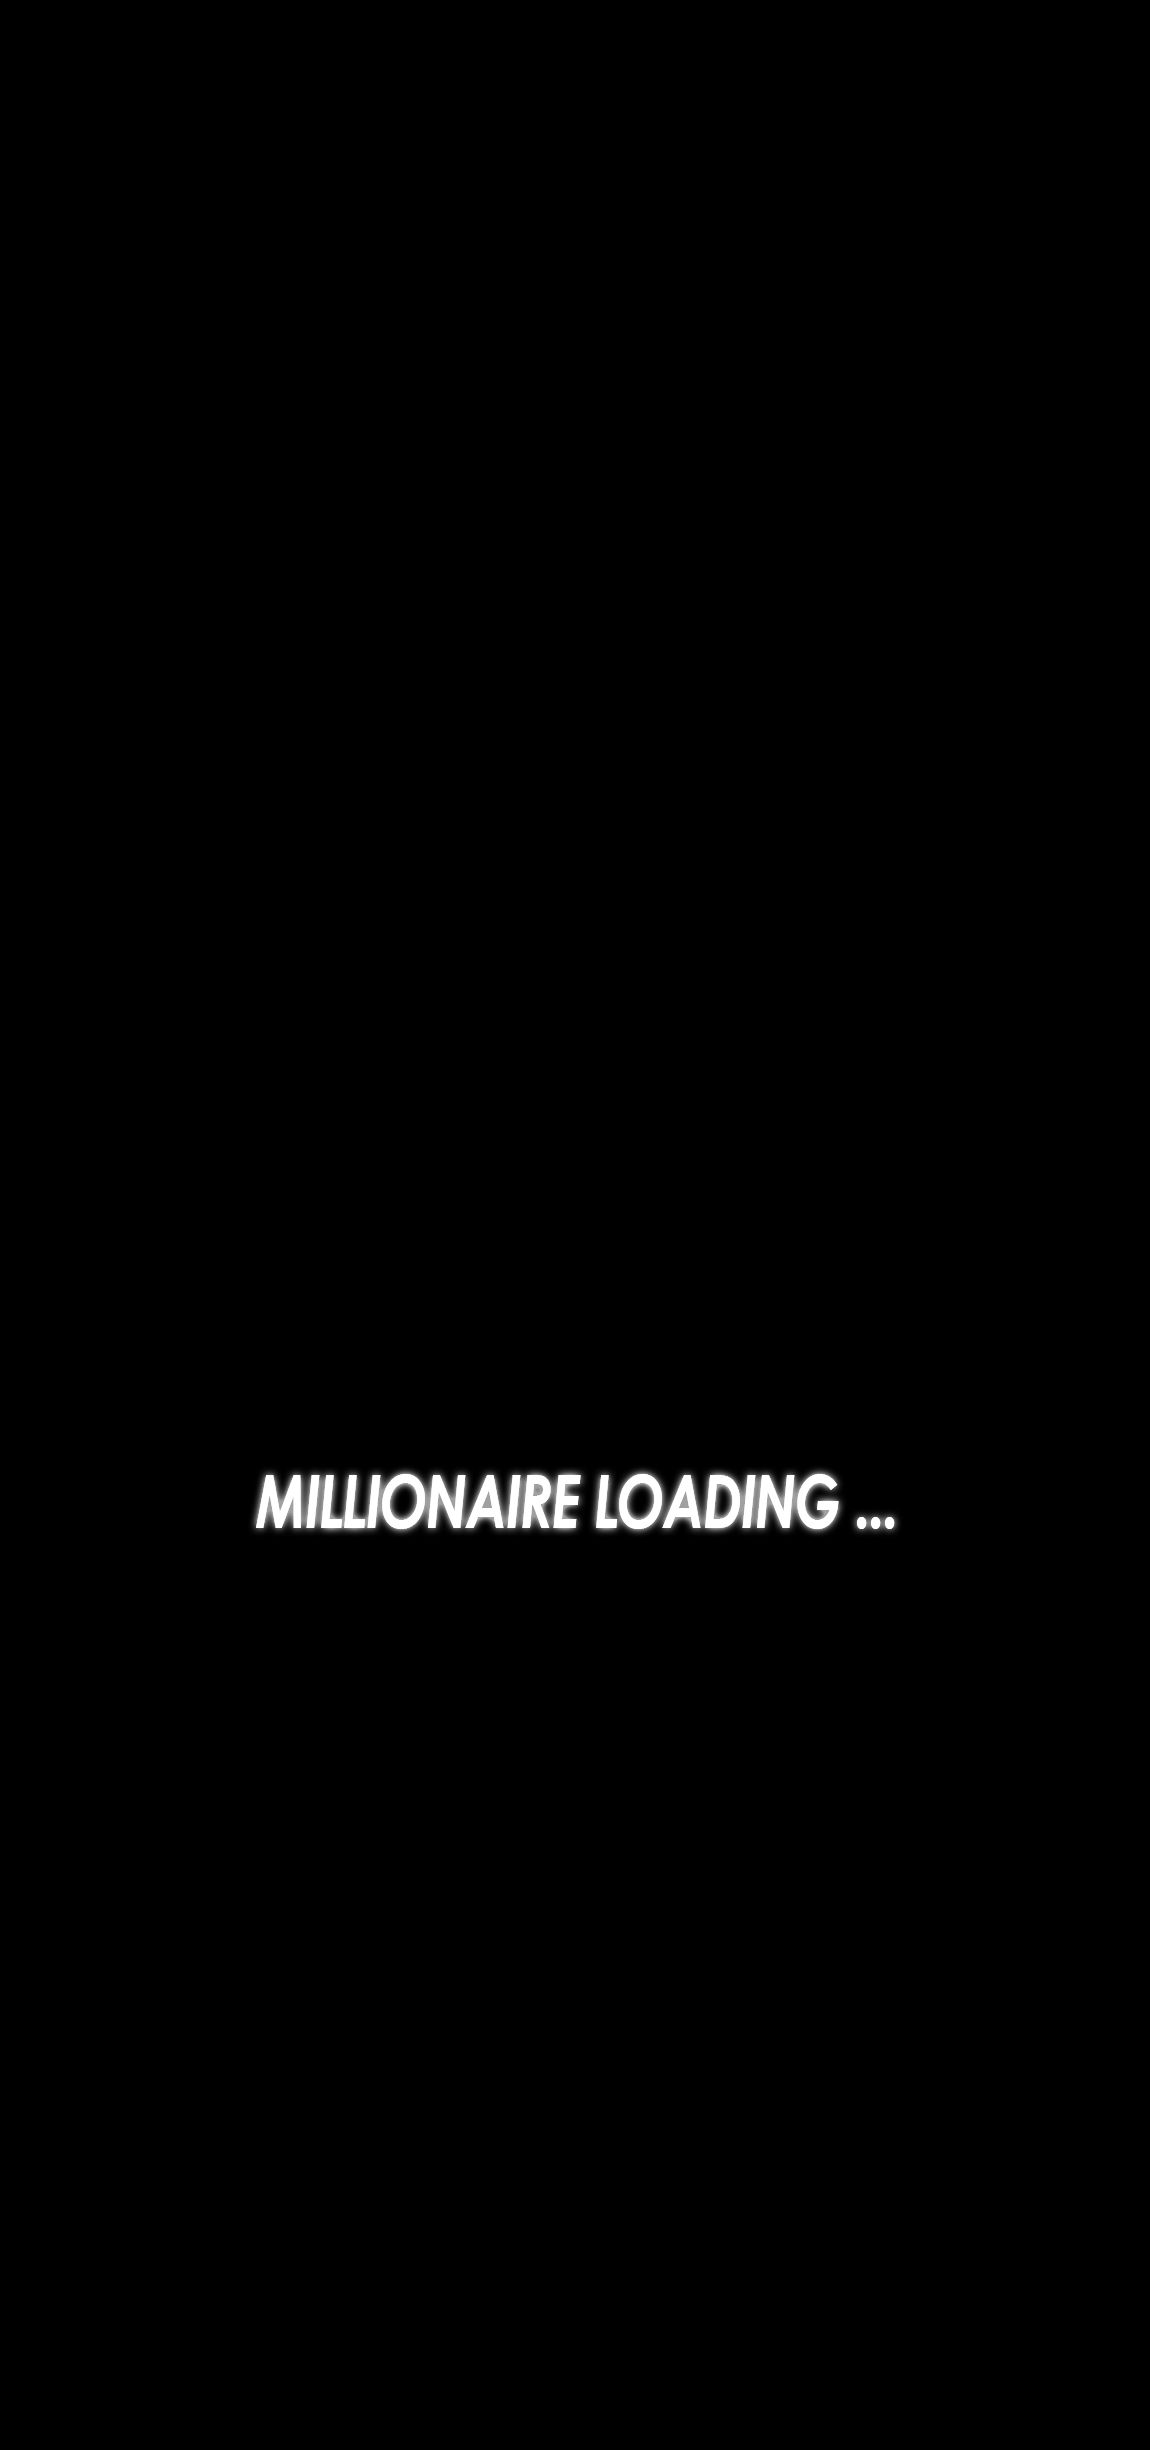 MILLIONAIRE LOADING. Vision board wallpaper, Luxury quotes, Get money quotes